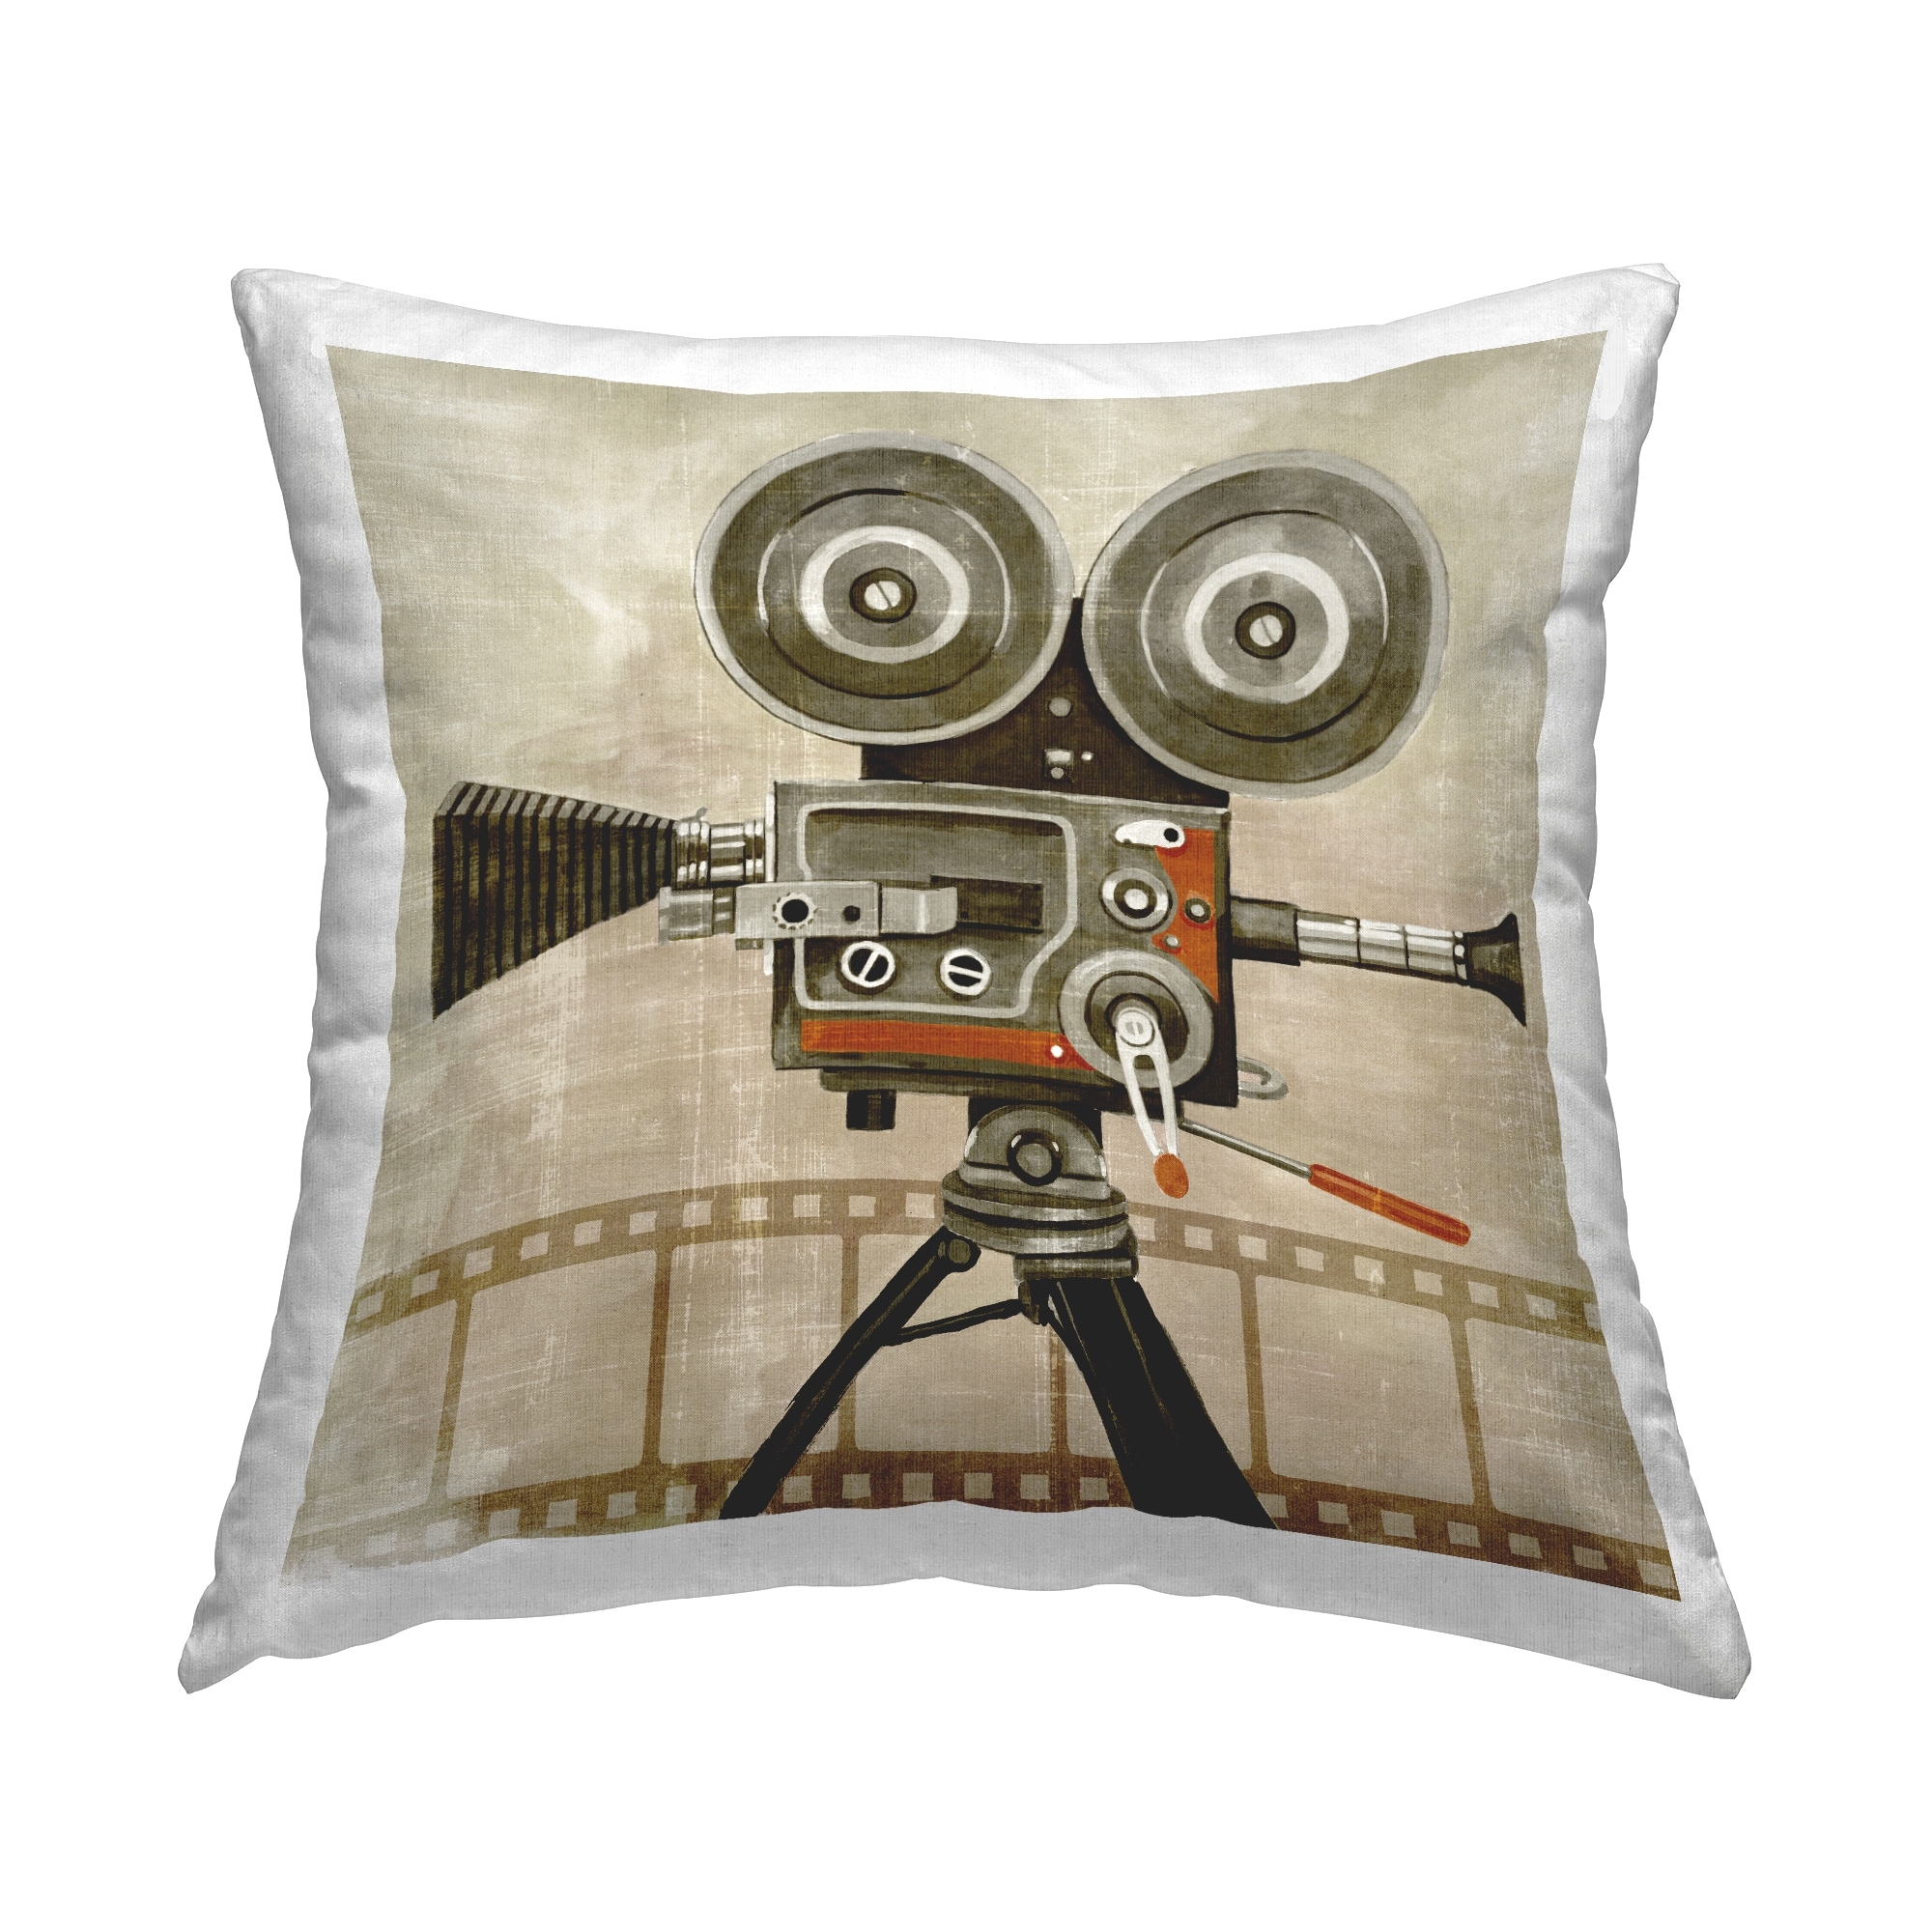 Stupell Antique Film Camera Vintage Movies Printed Throw Pillow Design by Grace Popp - Polyester - Pillow Sets - 18 x 7 x 18 - Single - Tan